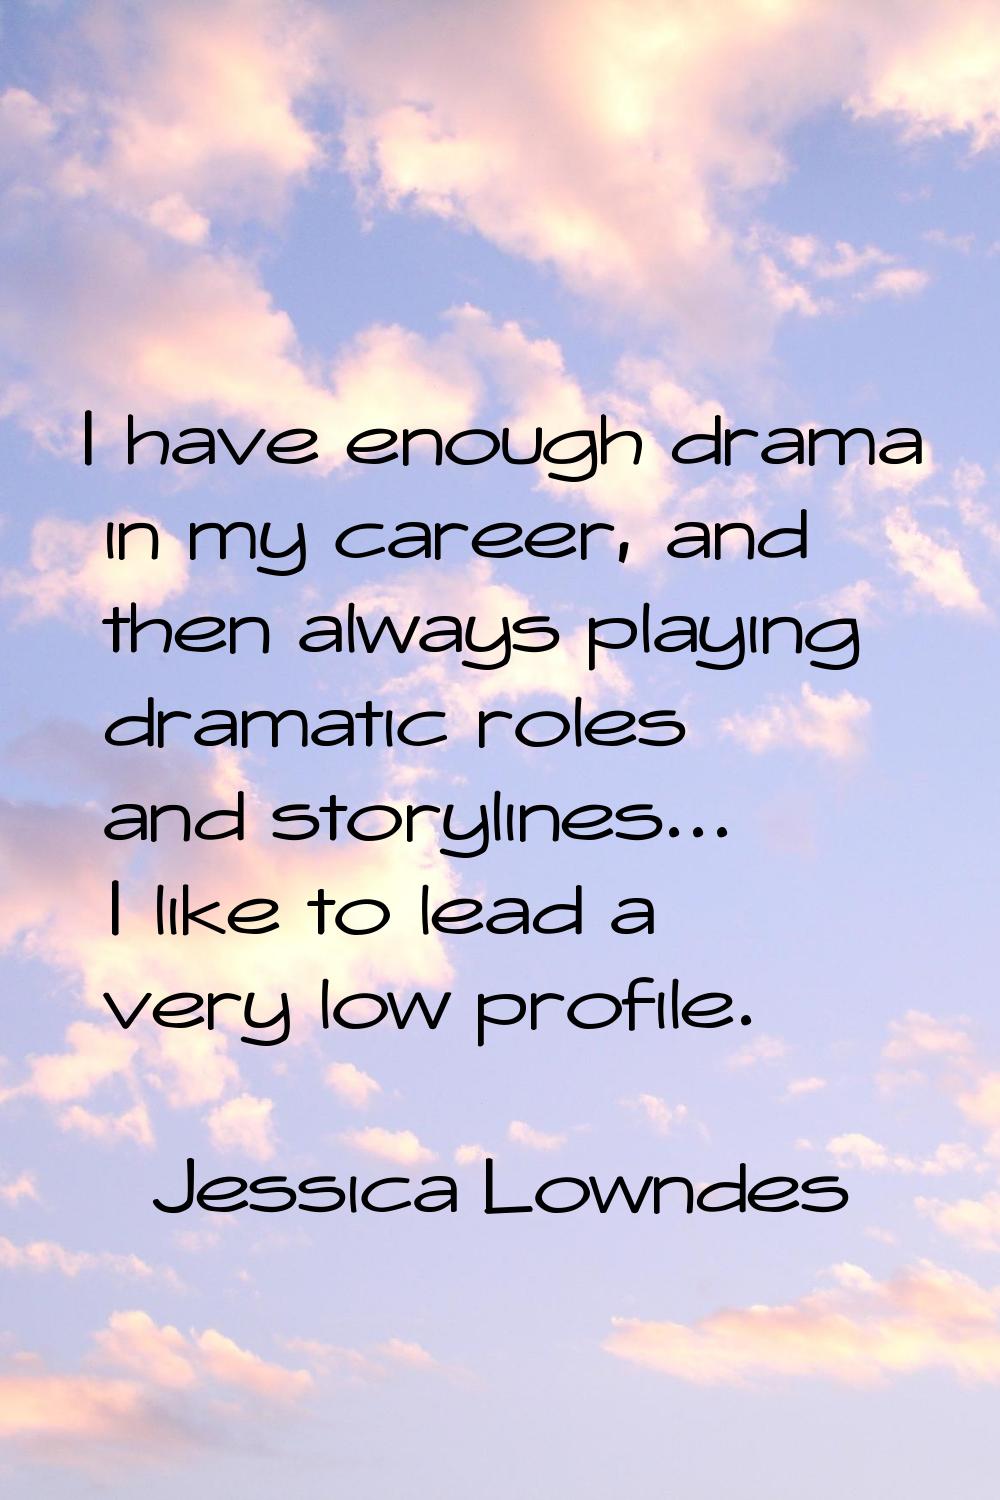 I have enough drama in my career, and then always playing dramatic roles and storylines... I like t